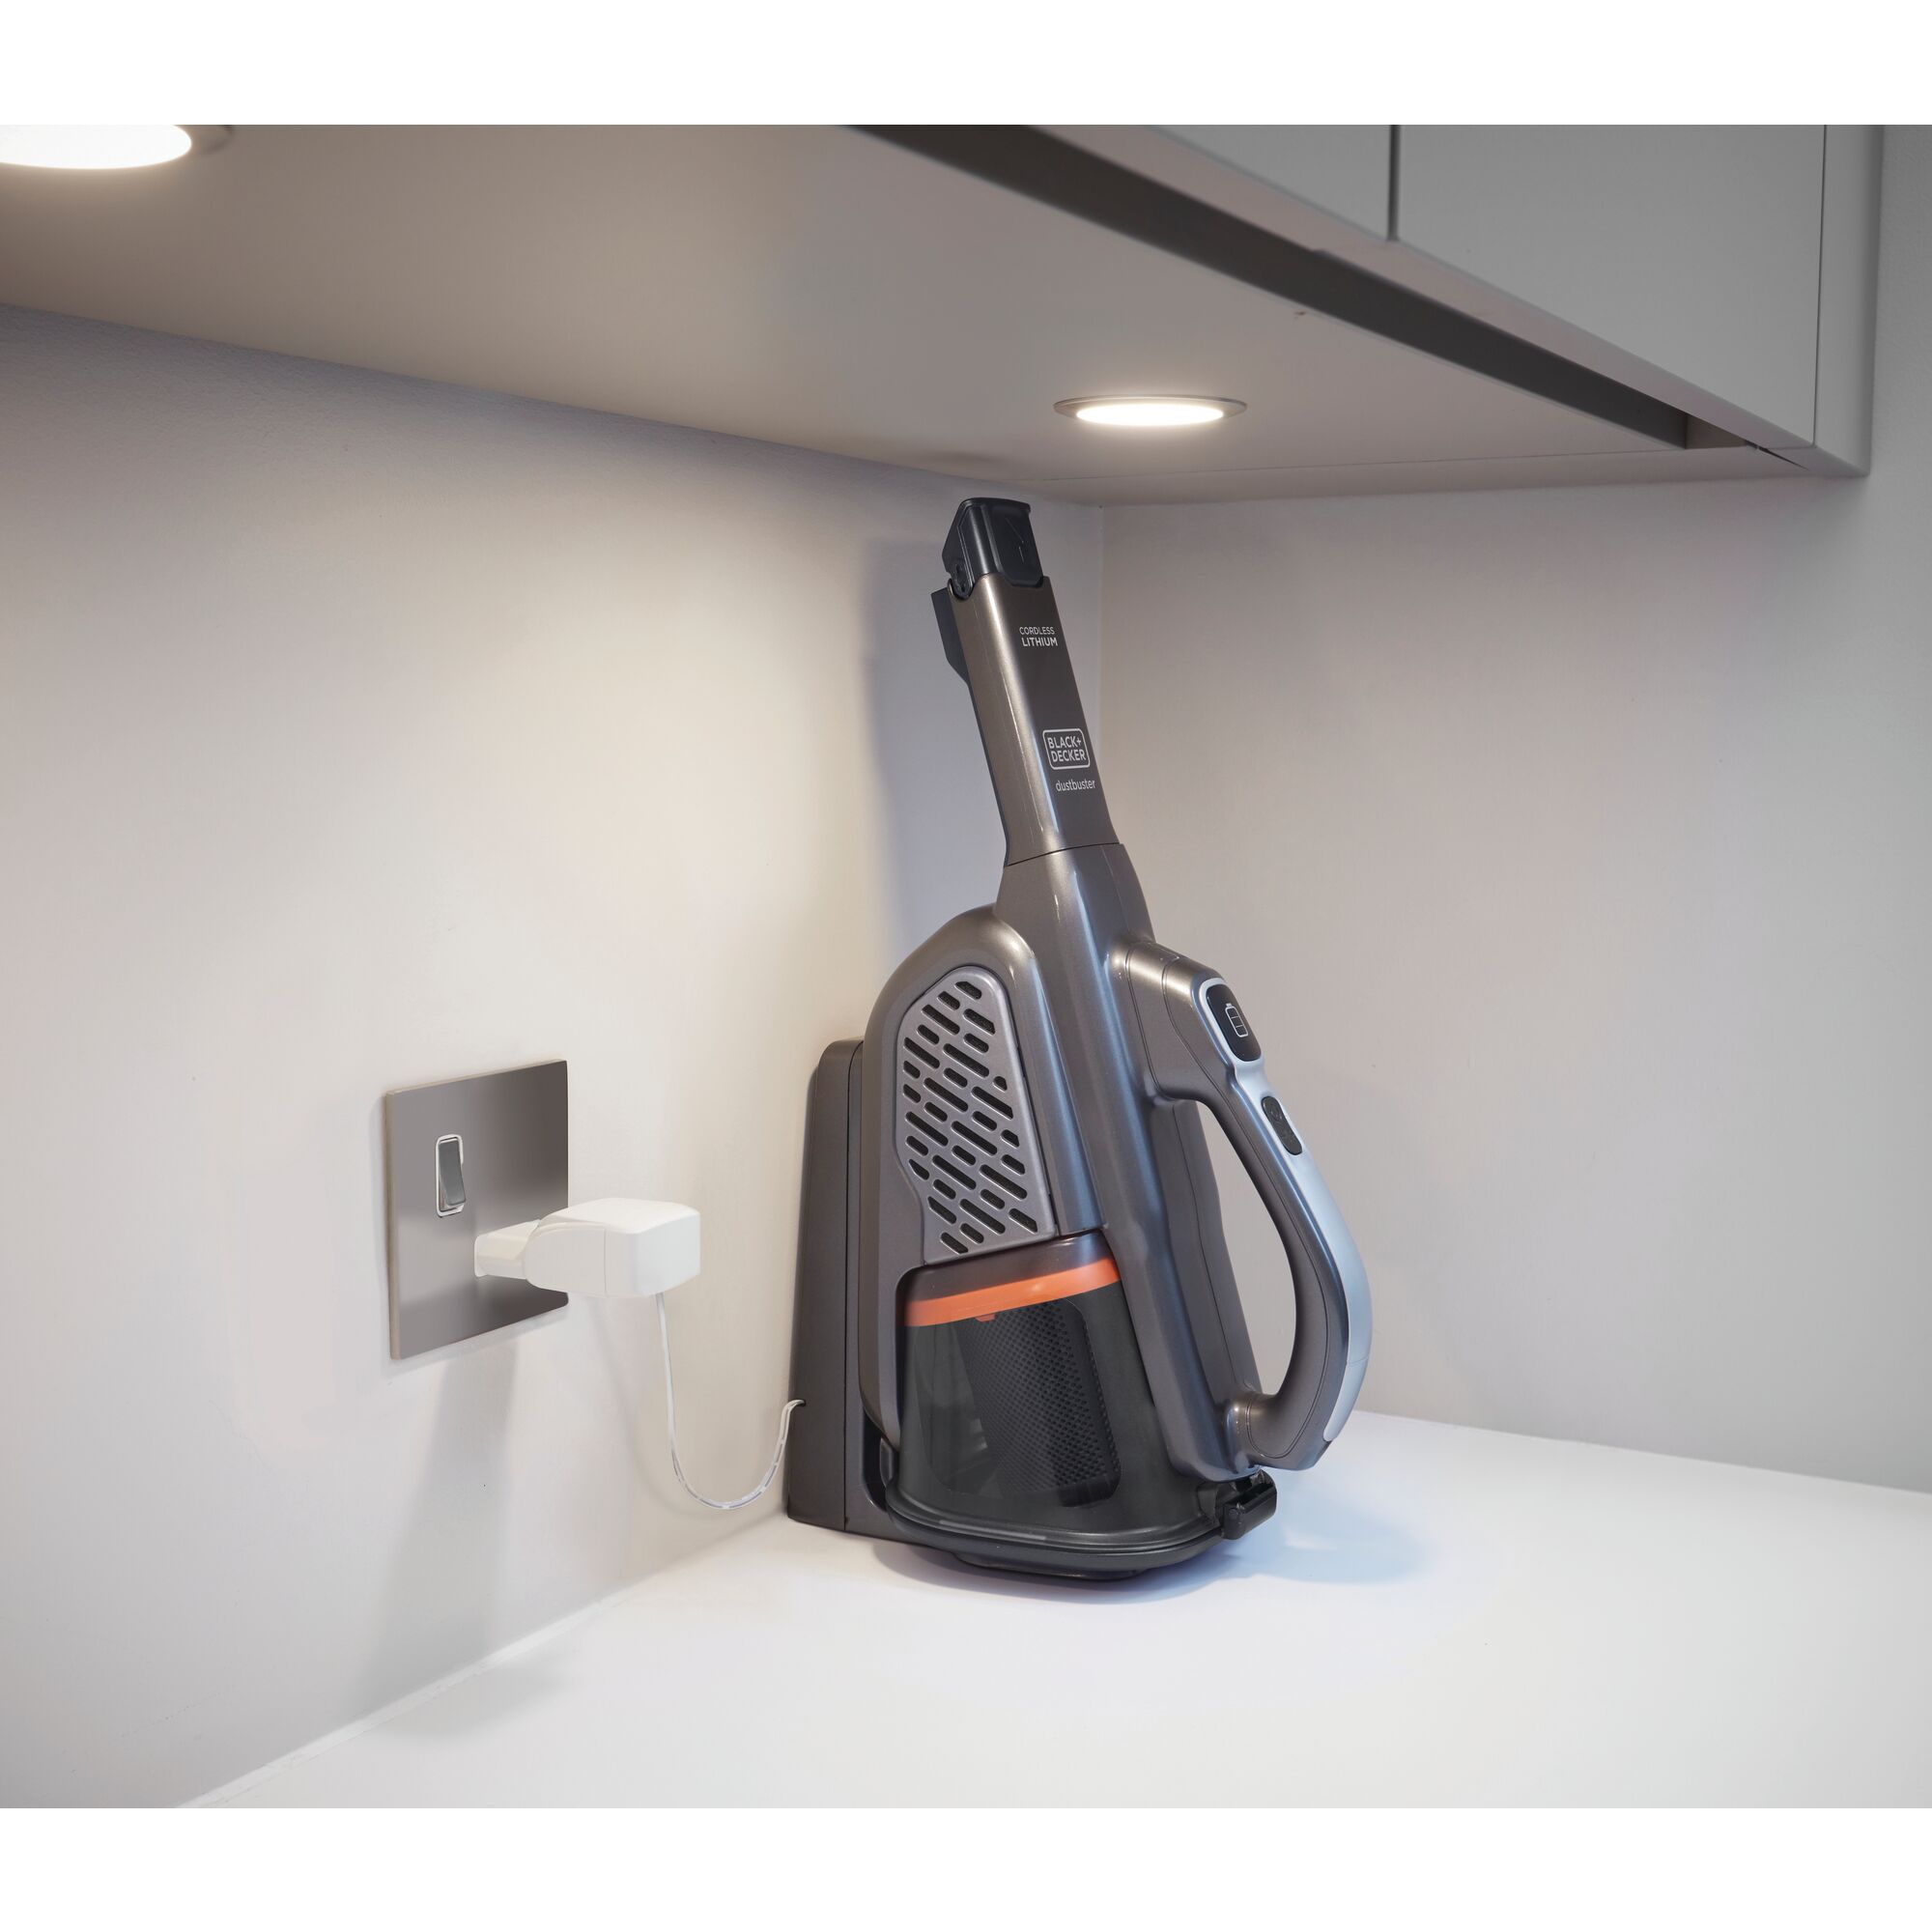 Wall mountable base charger feature of 16 volt MAX dustbuster Advanced Clean hand vacuum.